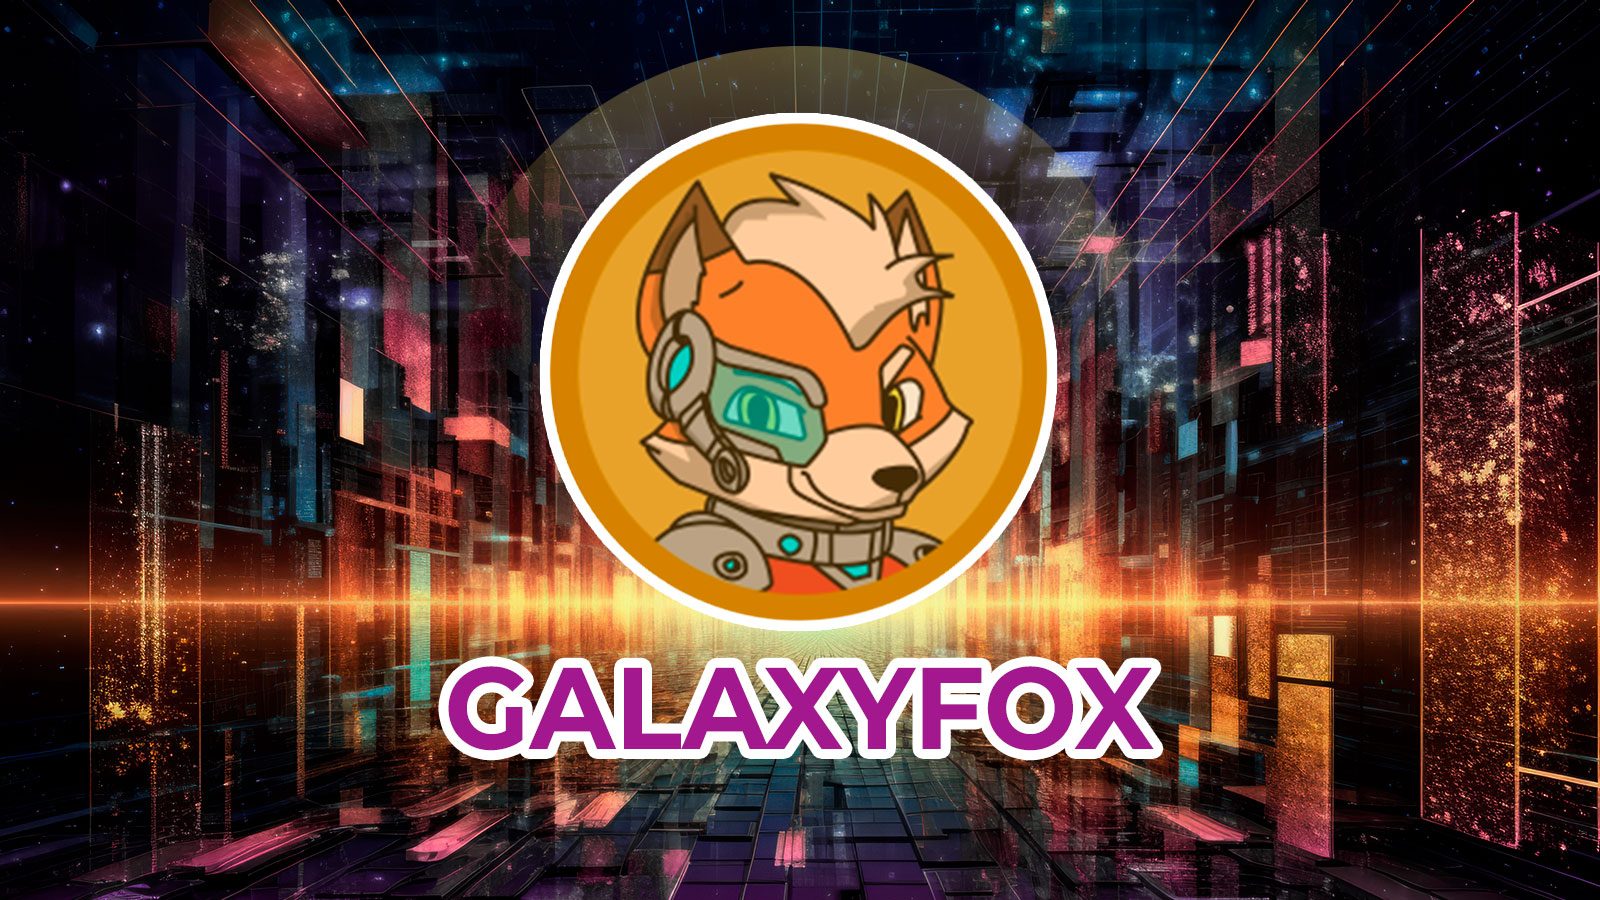 Galaxy Fox (GFOX) Token Release Campaign Might be Getting Steam in March, as Kaspa (KAS) PoW Altcoin Recovering